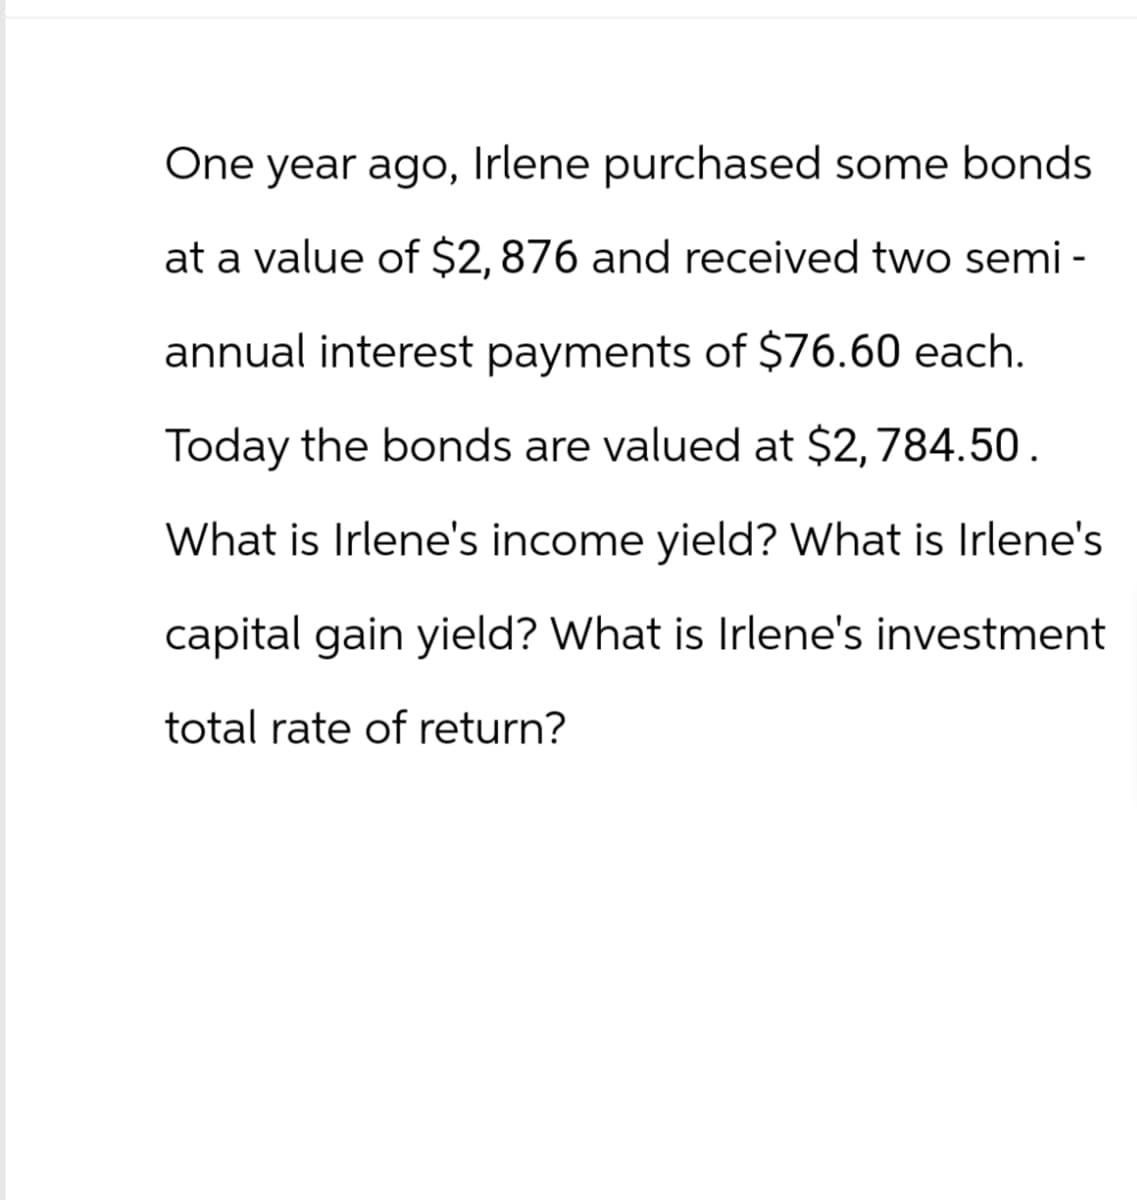 One year ago, Irlene purchased some bonds
at a value of $2,876 and received two semi-
annual interest payments of $76.60 each.
Today the bonds are valued at $2,784.50.
What is Irlene's income yield? What is Irlene's
capital gain yield? What is Irlene's investment
total rate of return?